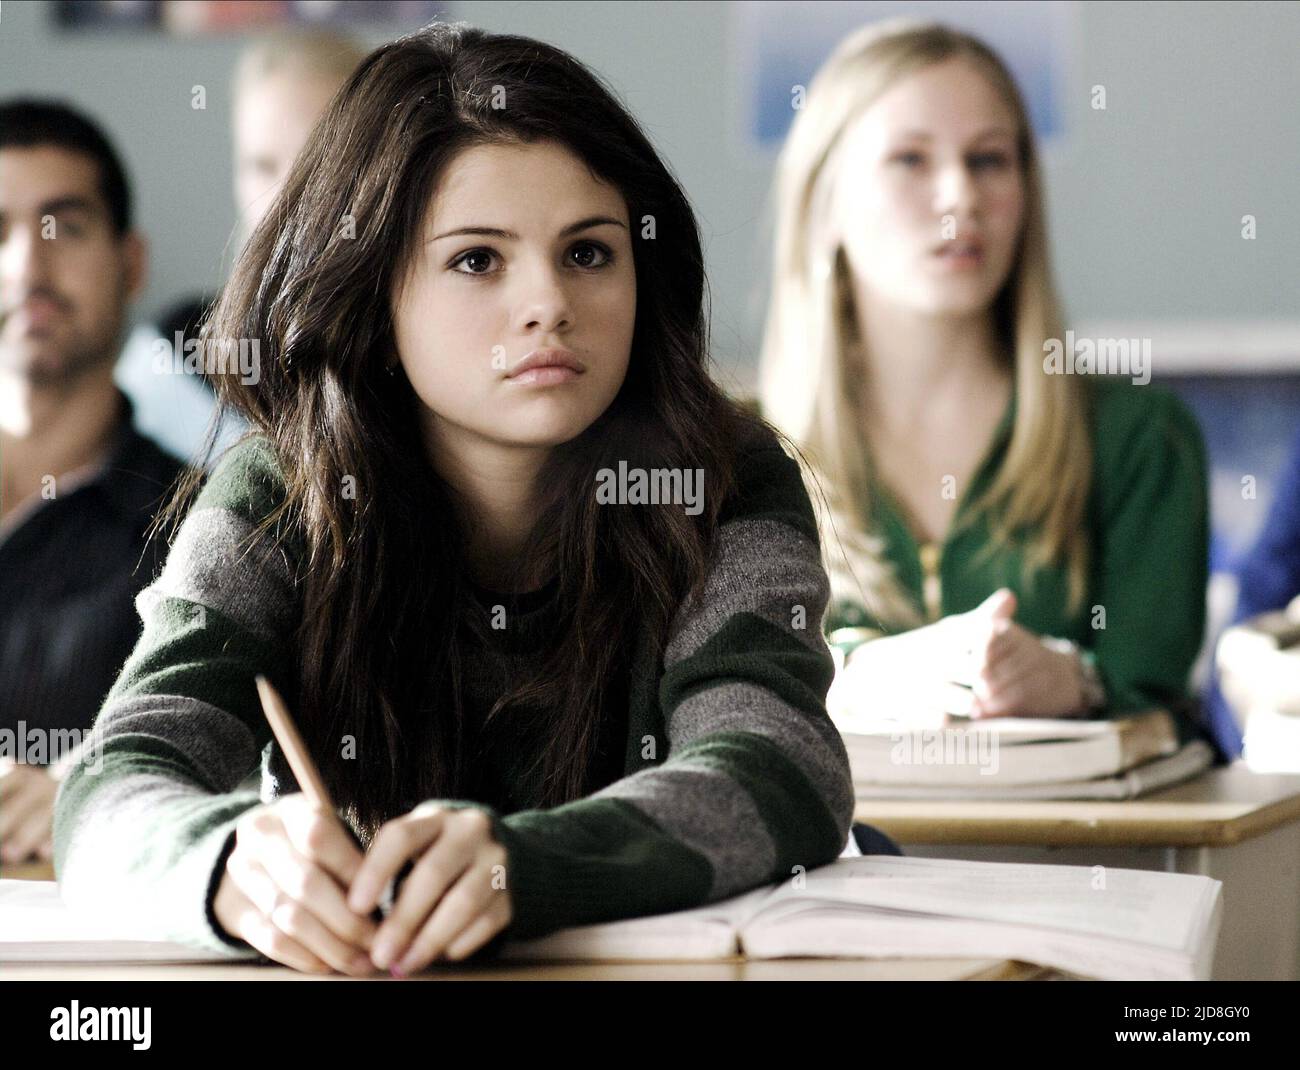 Image of ANOTHER CINDERELLA STORY, from left: Selena Gomez, Jessica Parker  Kennedy